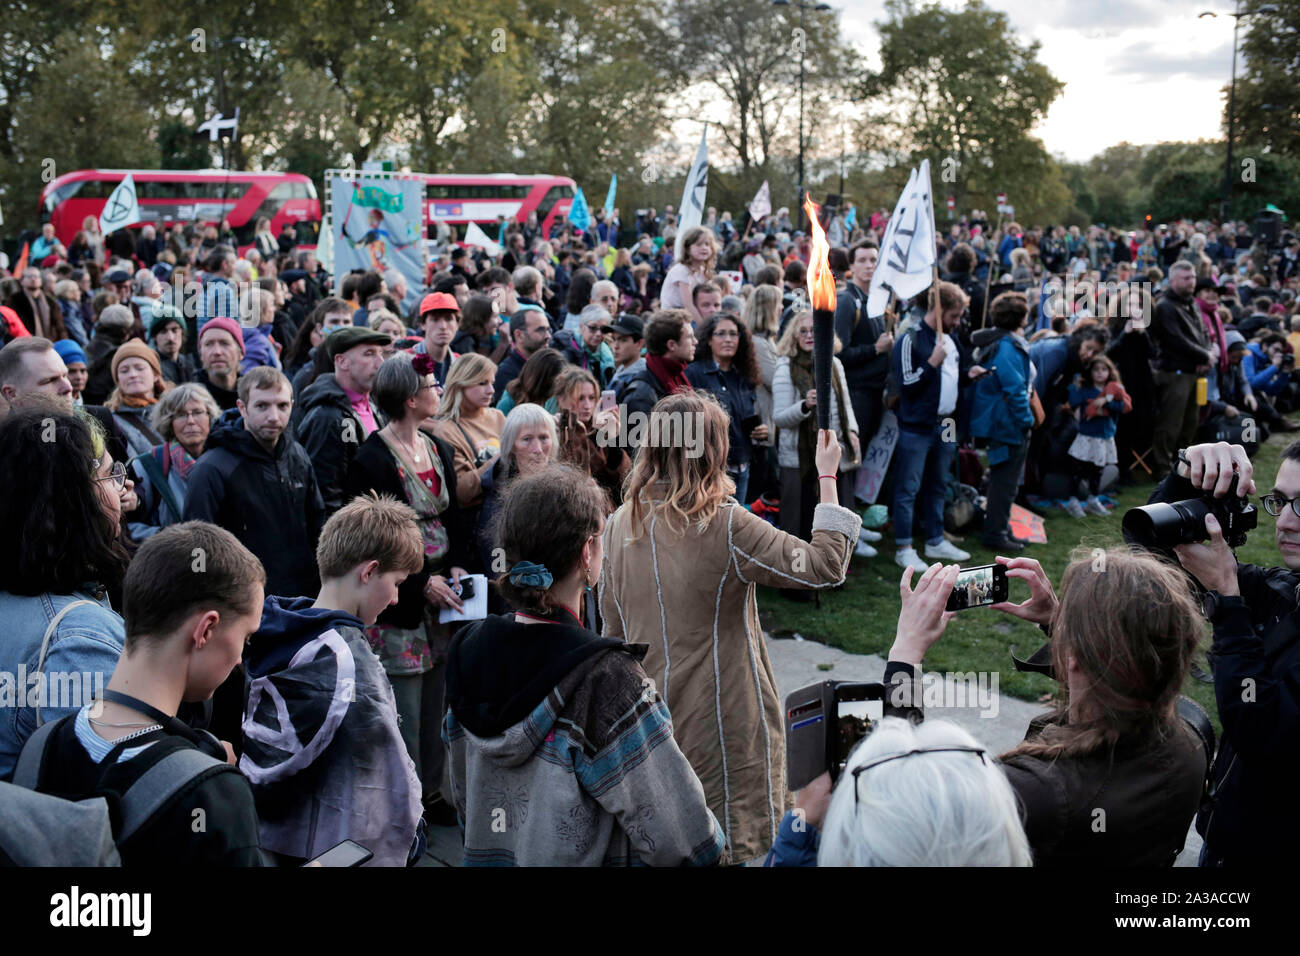 London, UK. 6th October 2019. Extinction Rebellion activists gather at Marble Arch for the start of two weeks of protests in which they plan to block every single road into central London. Other protest are expected in about 60 cities around the world. Credit: Stuart Boulton/Alamy Stock Photo